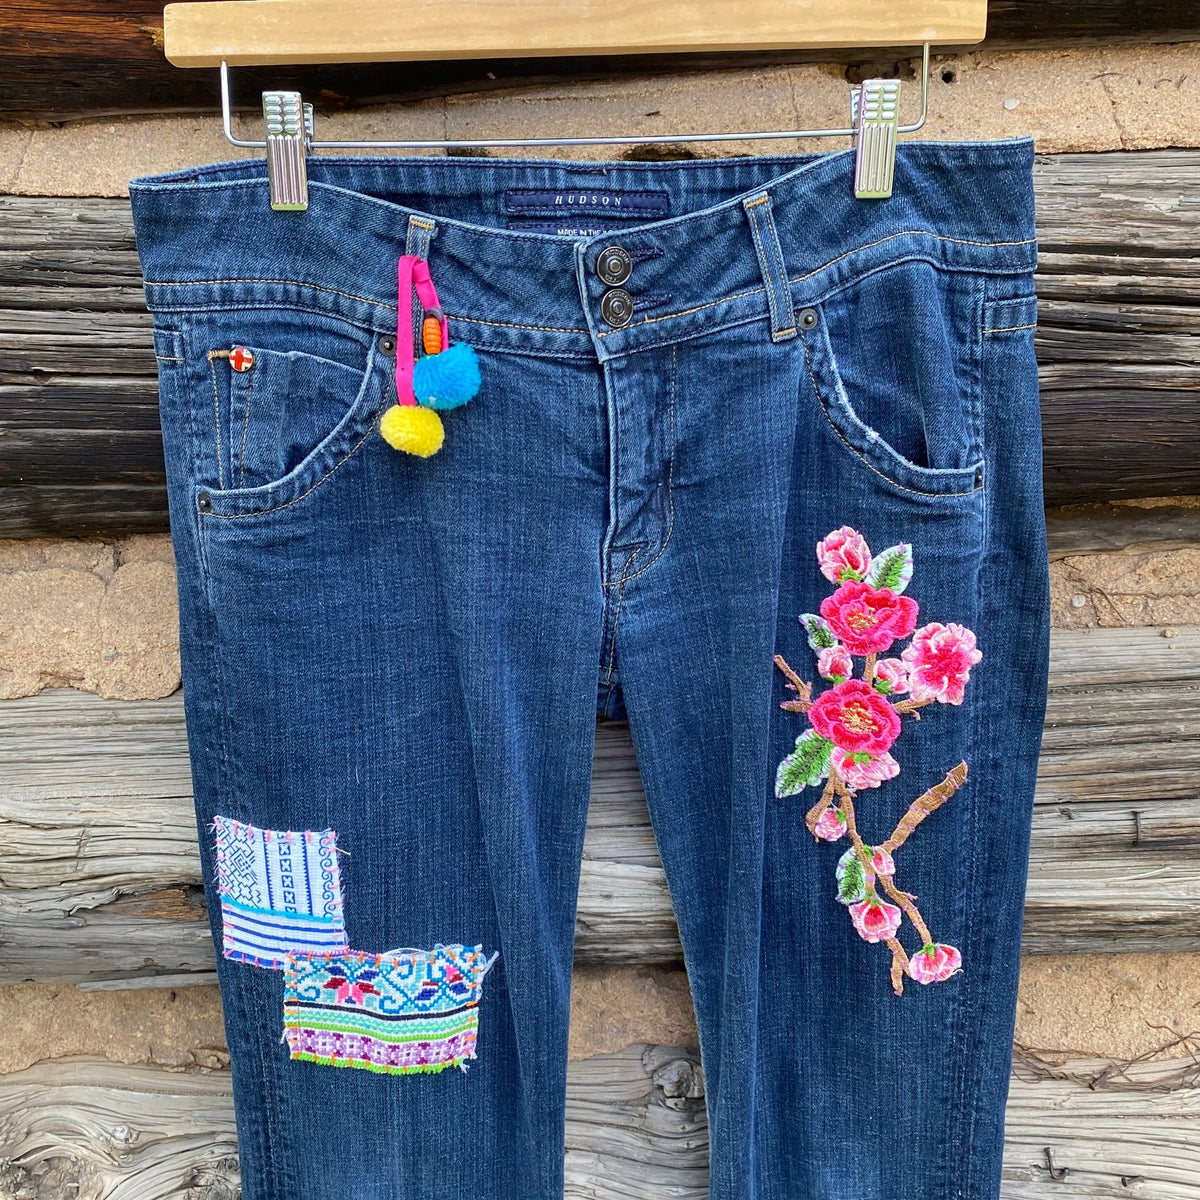 Tessa Hand Me Downs Upcycled Jeans Lucky Brand size 6/28 Sale 50% of –  Tessa Clogs / Swedish Clog Cabin